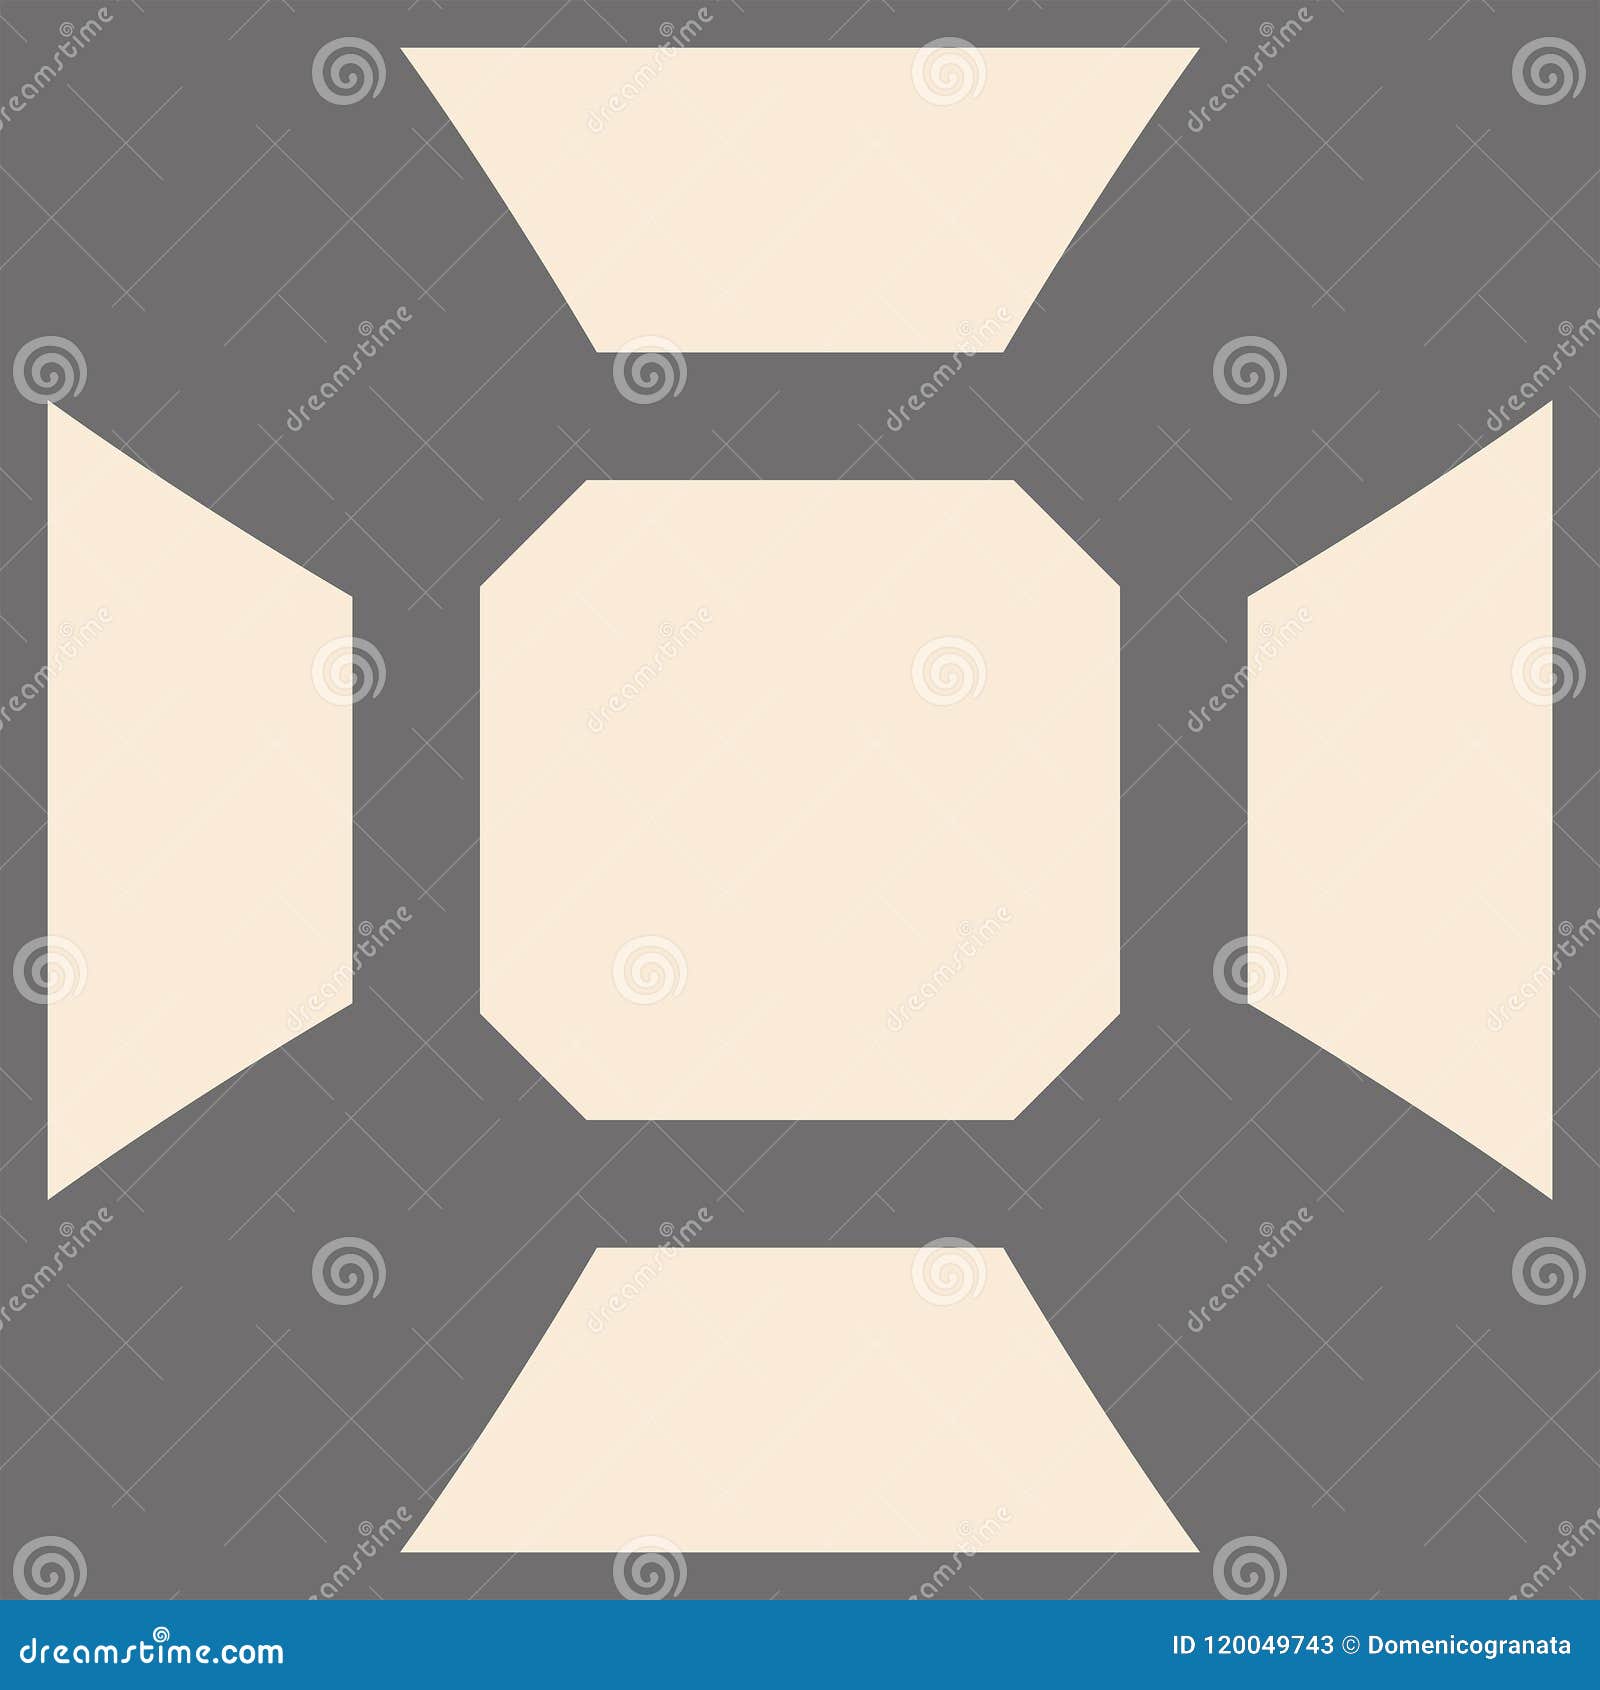 sacral and geometric pattern for a tile